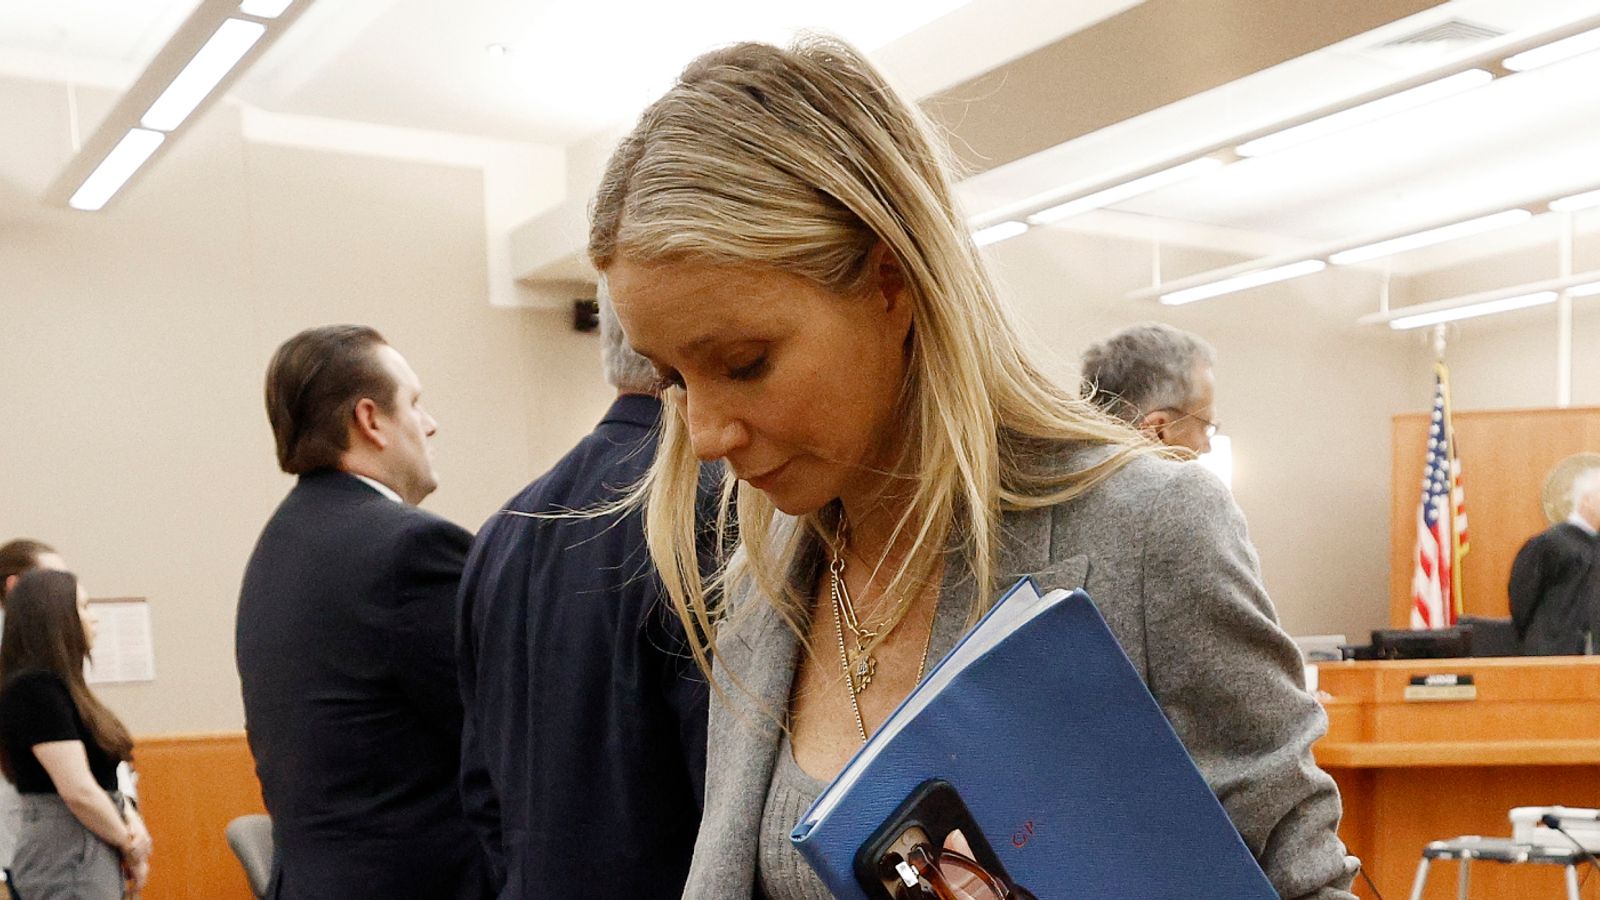 Gwyneth Paltrow accuser in 'really negative place' after actress 'crashed into him' on ski slope, his daughter tells court